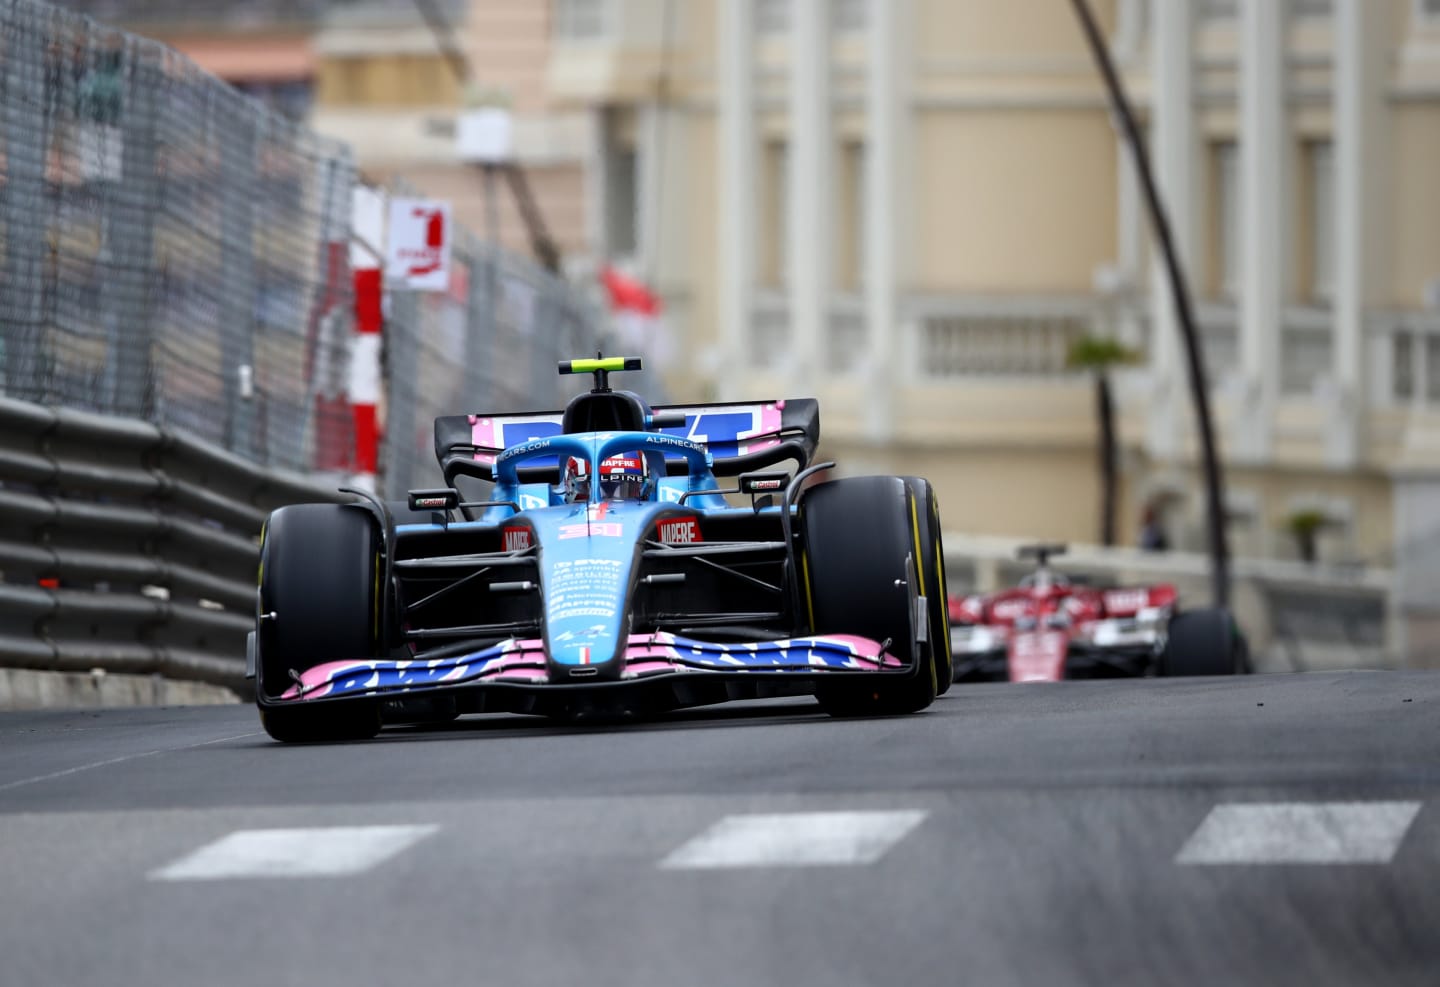 MONTE-CARLO, MONACO - MAY 29: Esteban Ocon of France driving the (31) Alpine F1 A522 Renault on track during the F1 Grand Prix of Monaco at Circuit de Monaco on May 29, 2022 in Monte-Carlo, Monaco. (Photo by Eric Alonso/Getty Images)